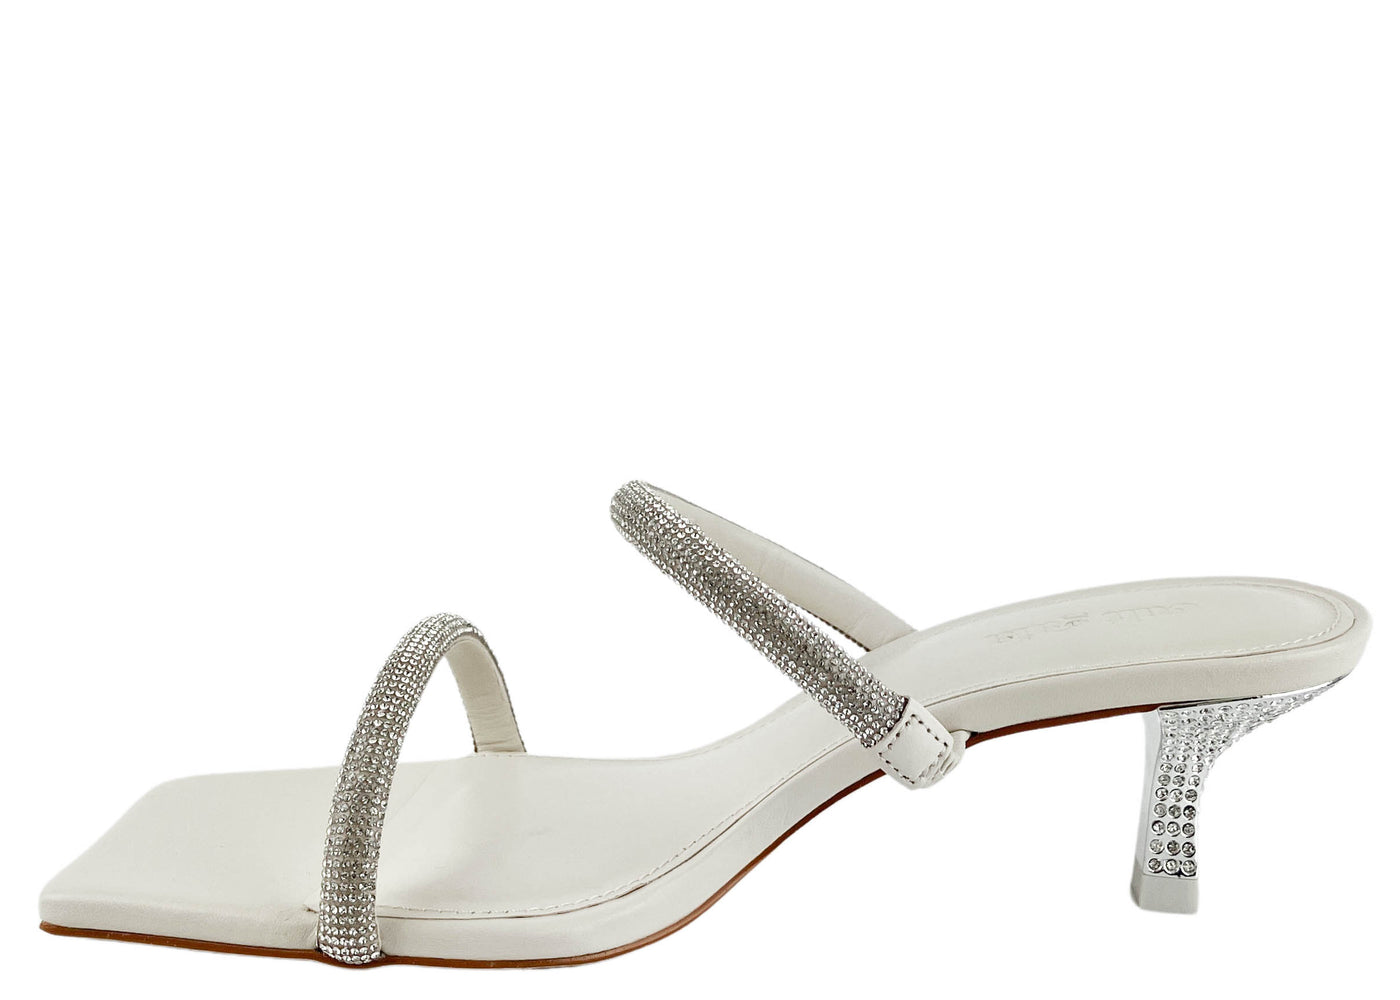 Cult Gaia Nami Sandals in Off White - Discounts on Cult Gaia at UAL